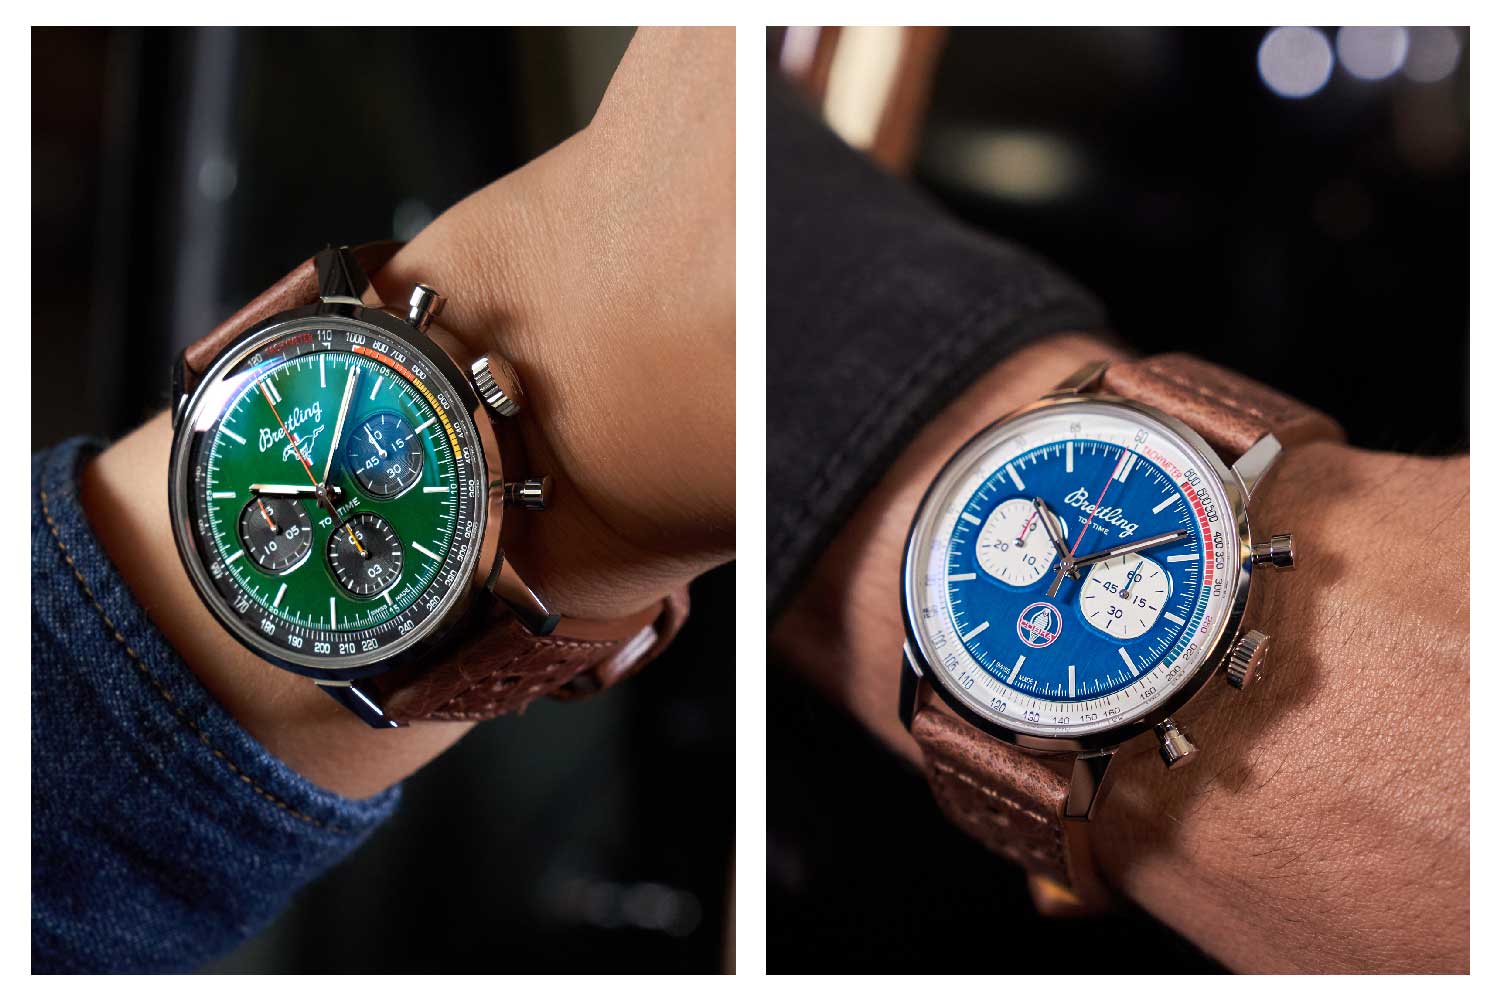 The Breitling Top Time Classic Cars Squad is a trio of chronographs inspired by three equally iconic automobiles: the Chevrolet Corvette, the Ford Mustang and the Shelby Cobra.